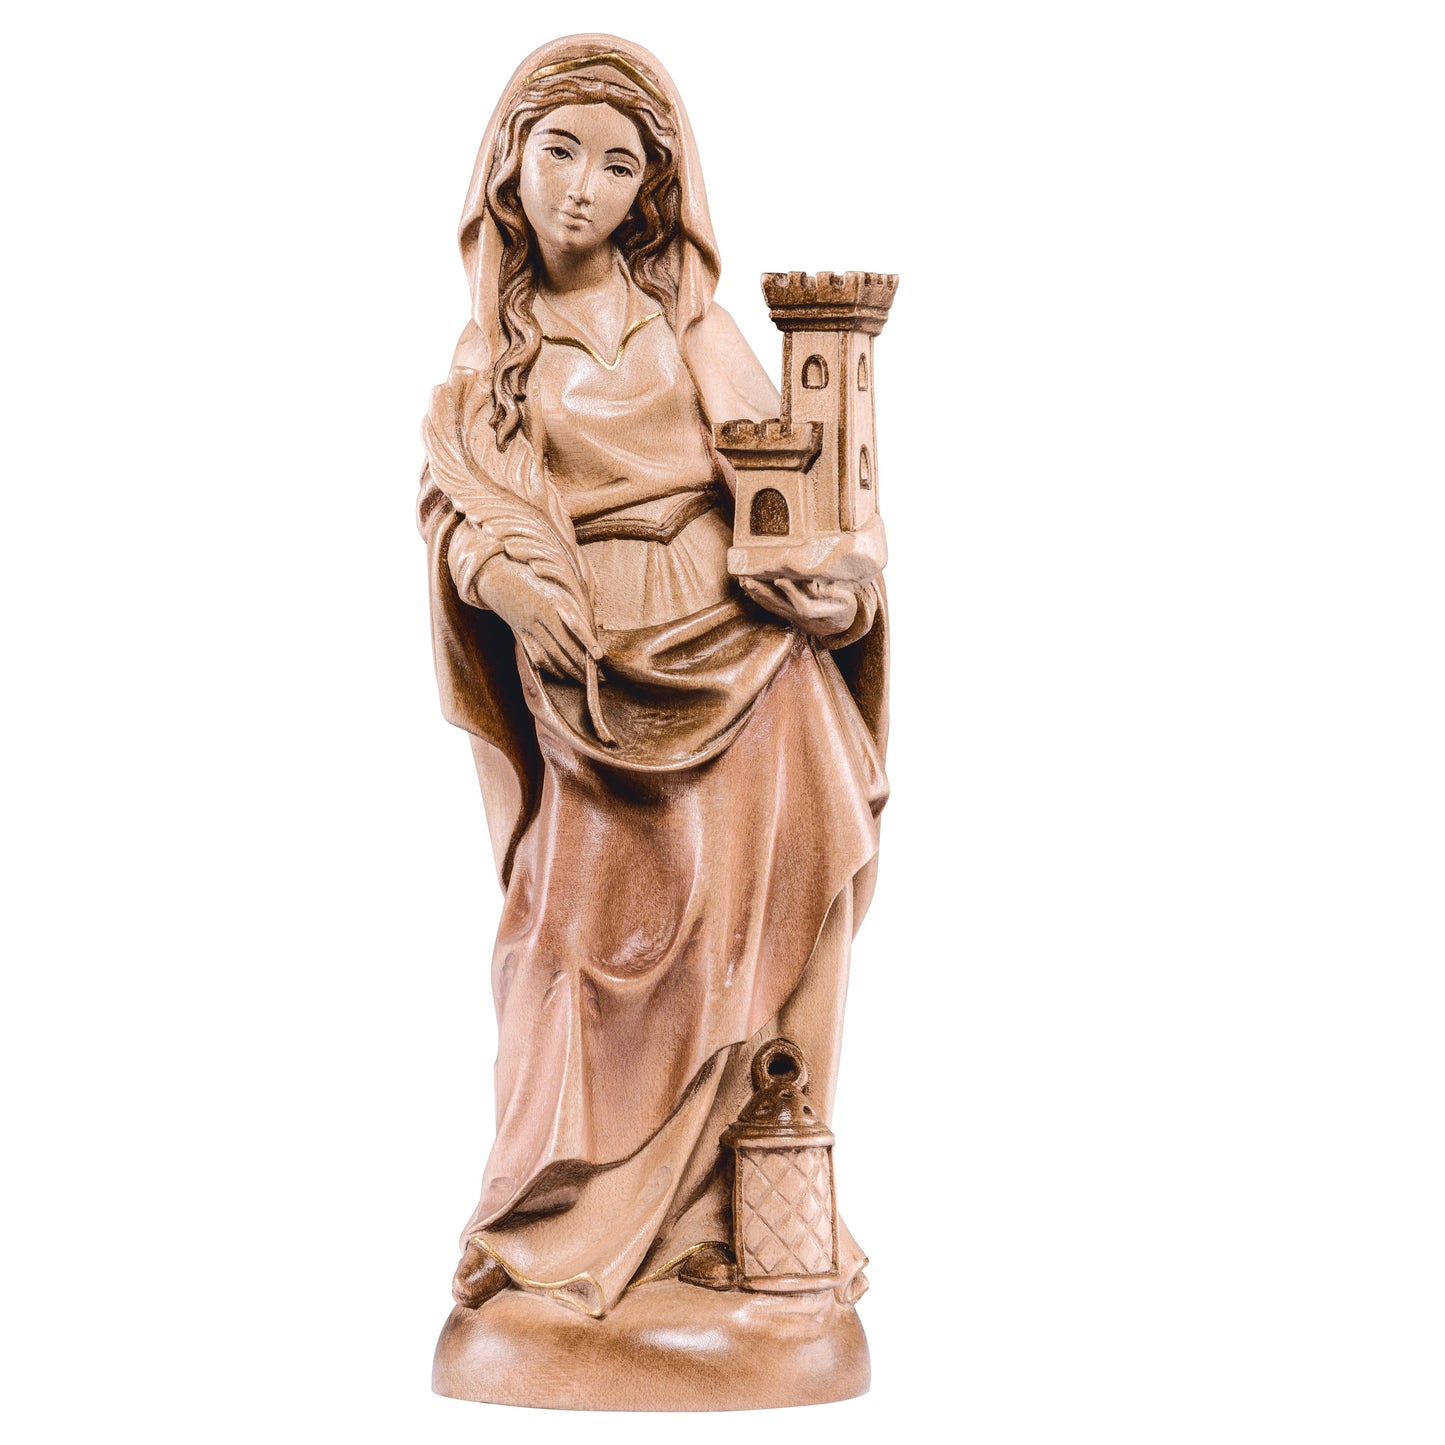 Mondo Cattolico Glossy / 30 cm (11.8 in) Wooden statue of St. Barbara gothic style